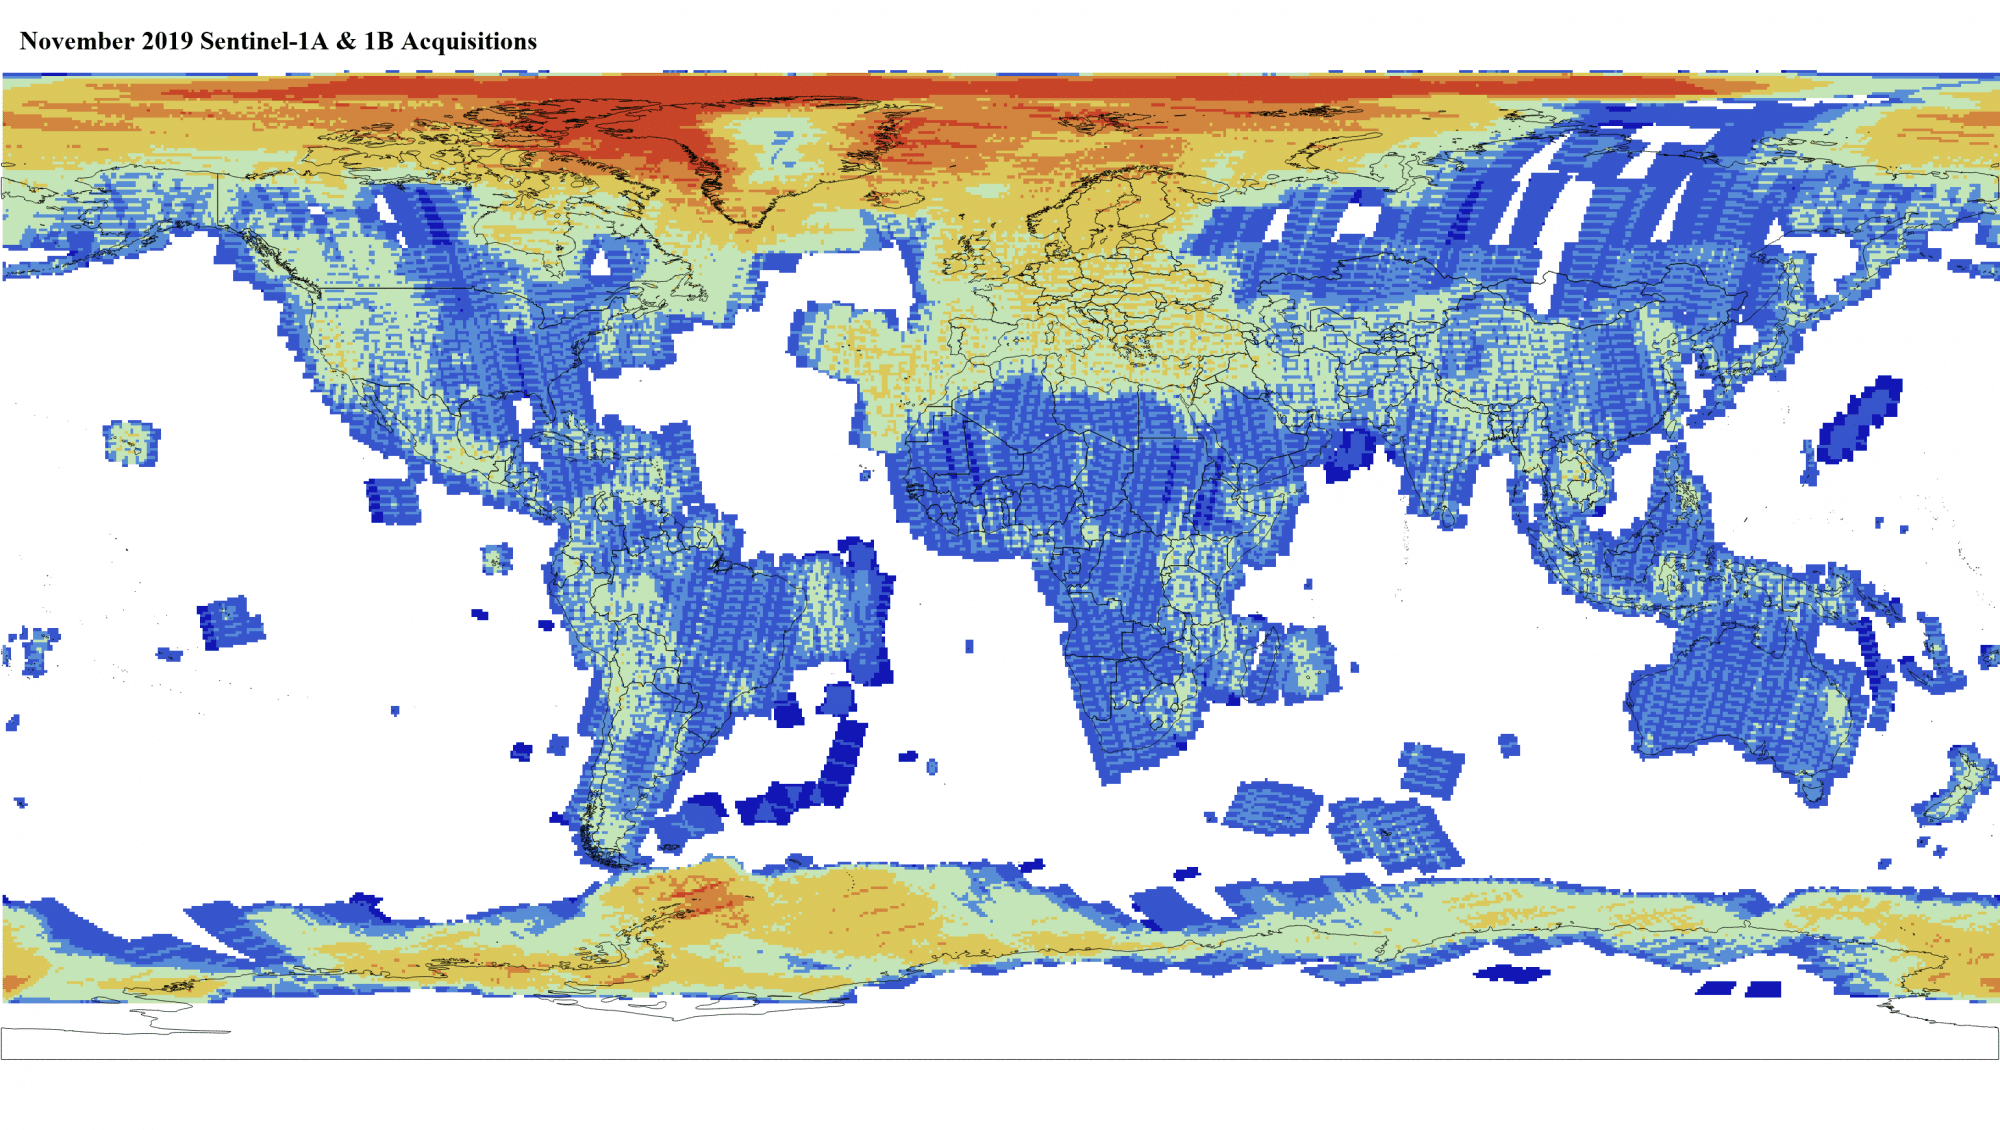 Heat map of Sentinel-1A and -1B GRD global acquisitions November 2019